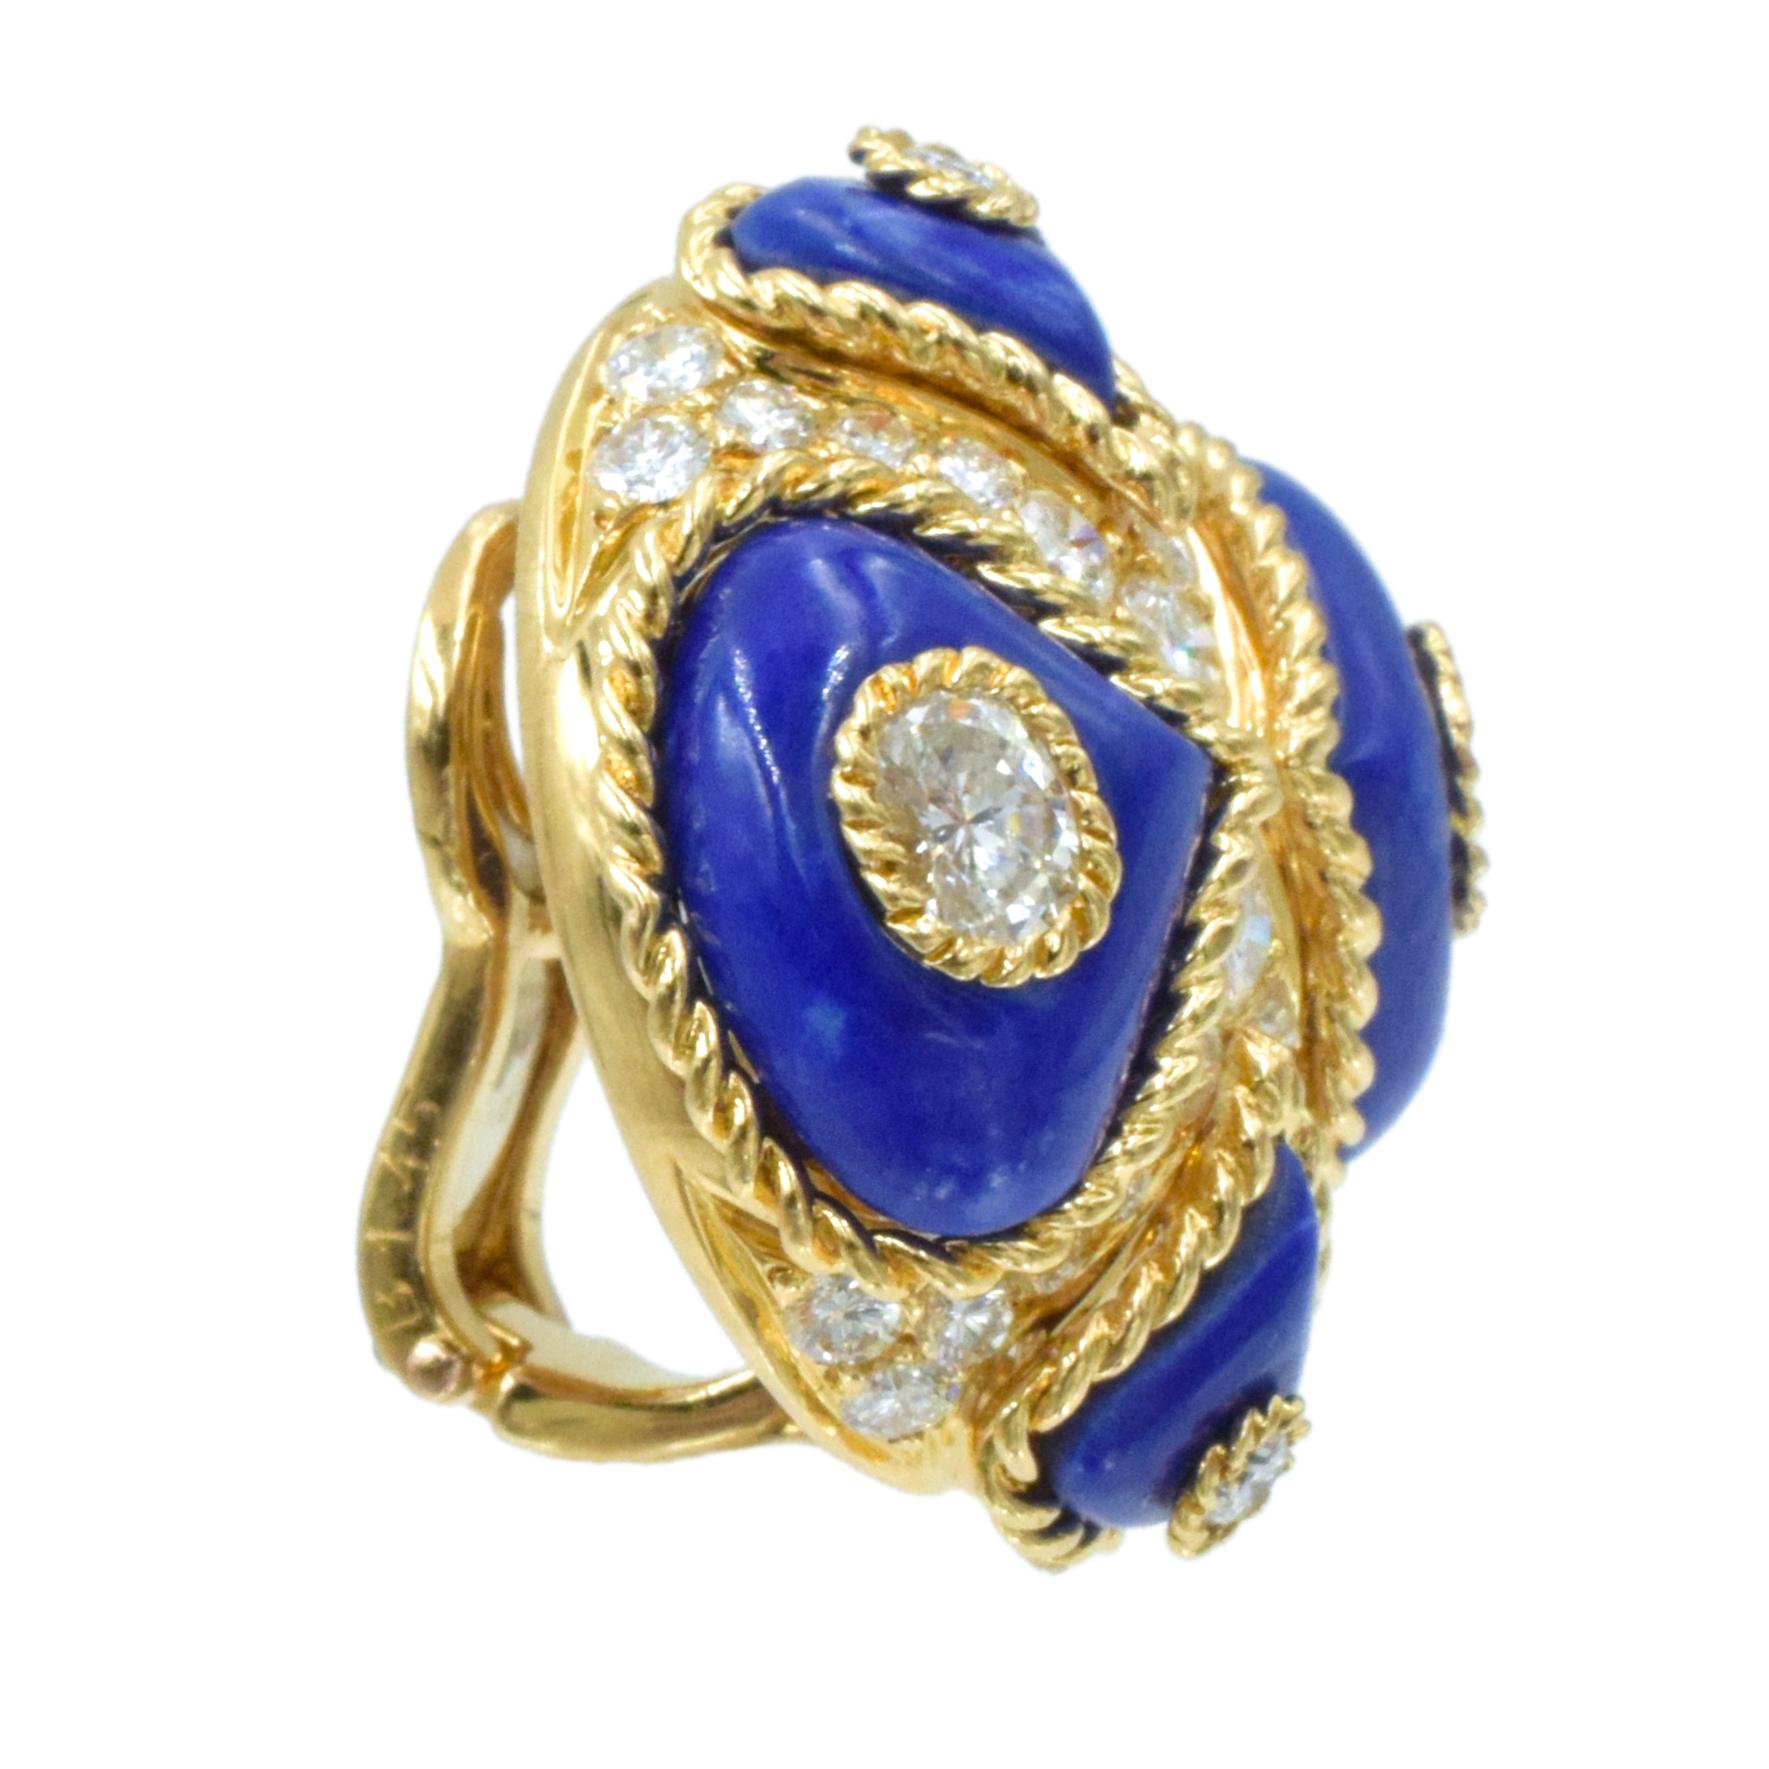 Alexandre Reza Lapis Lazuli and Diamond Ring in 18k Yellow Gold In Excellent Condition For Sale In New York, NY